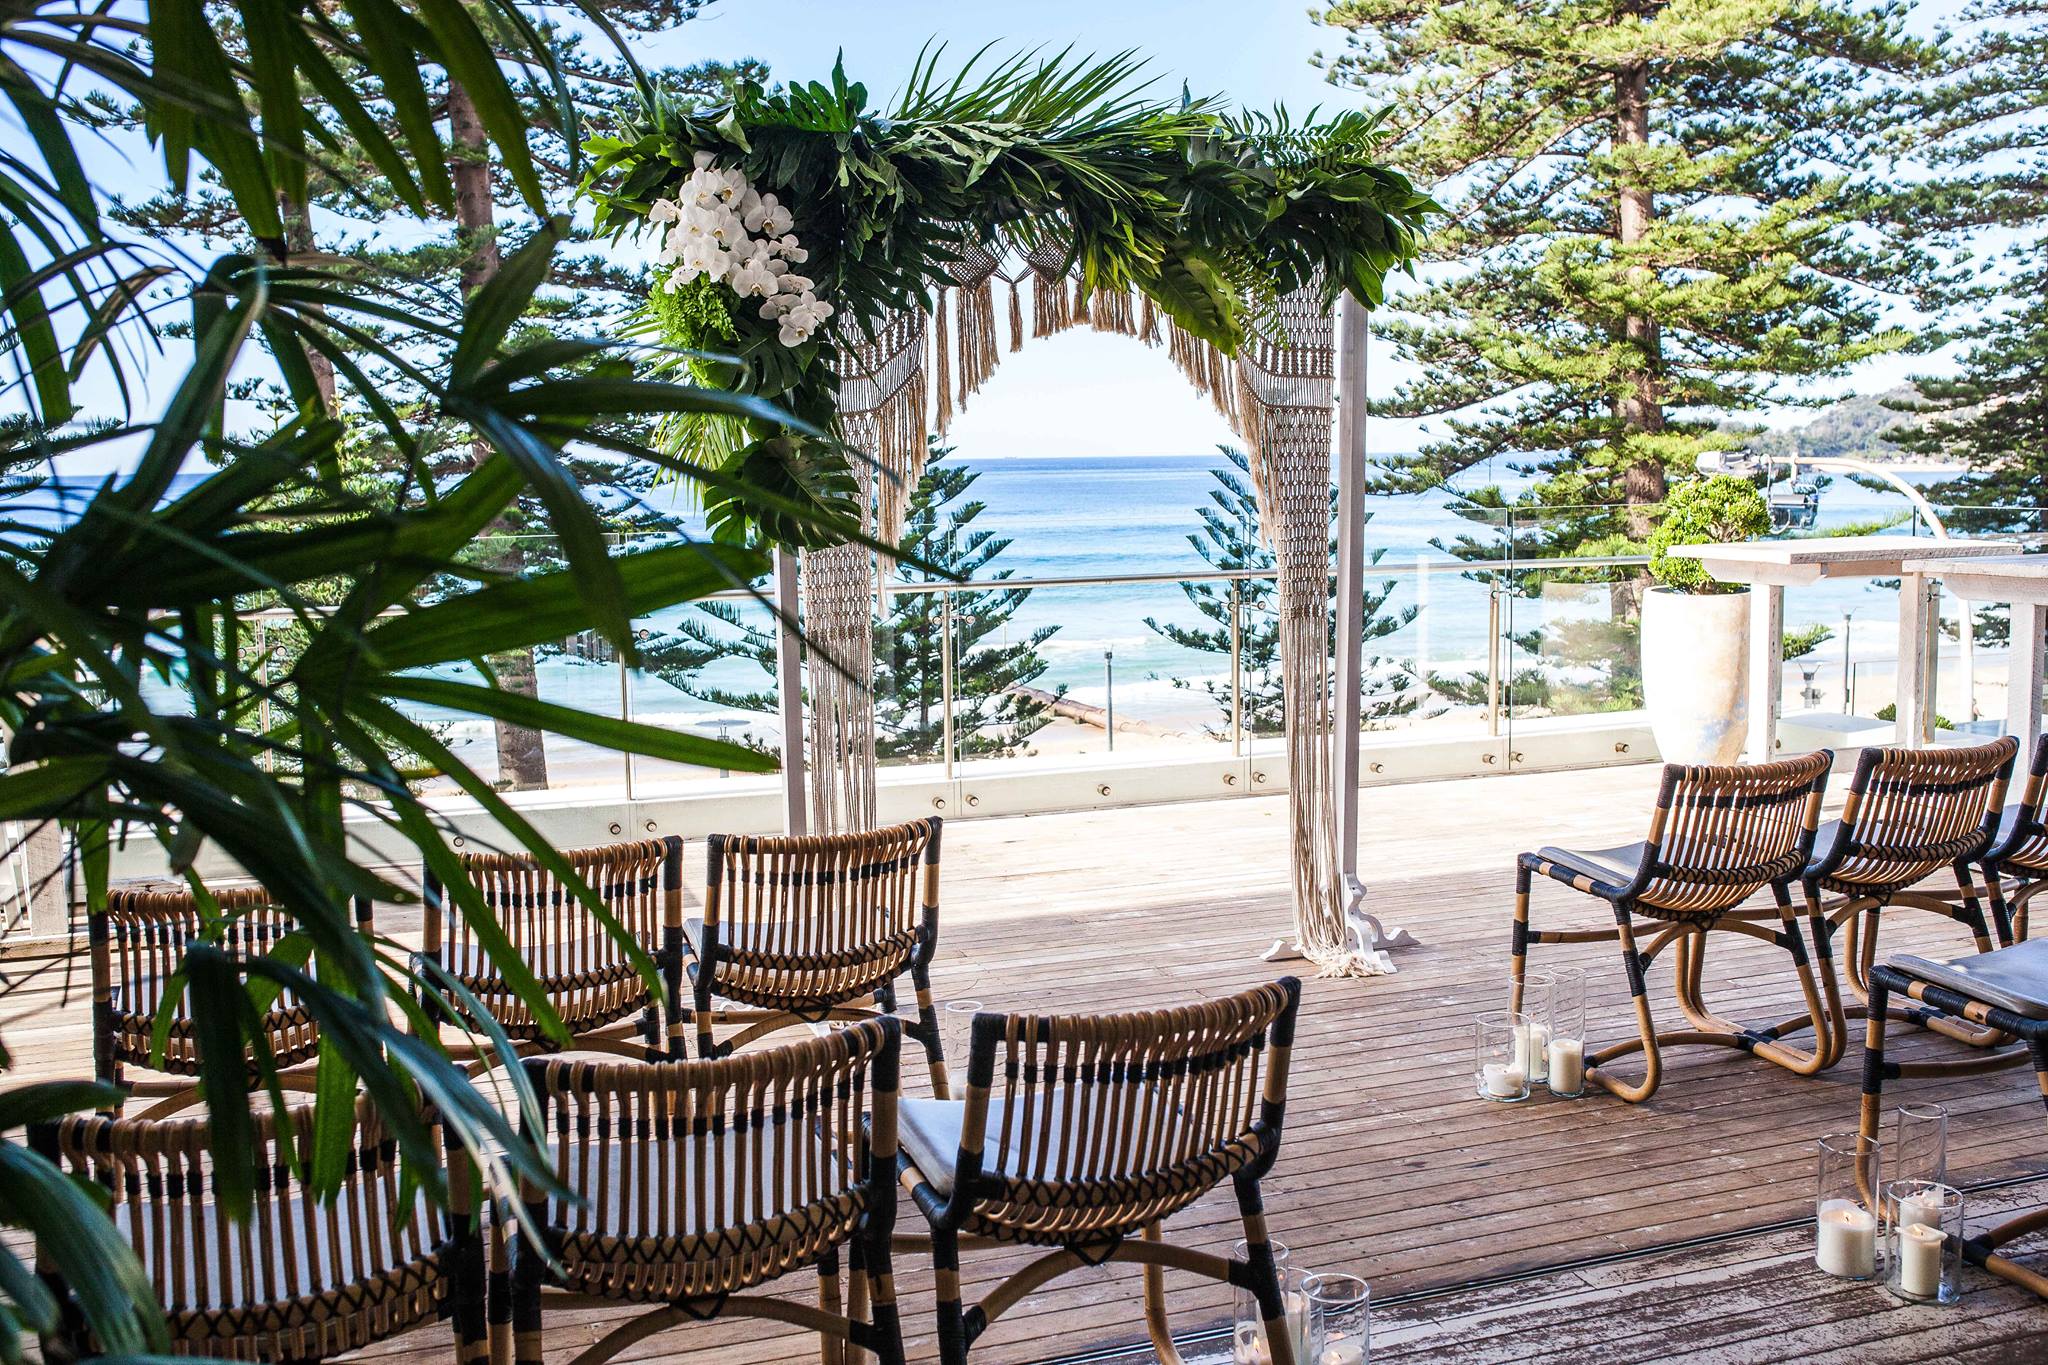 10 of the best rooftop wedding venues in Sydney